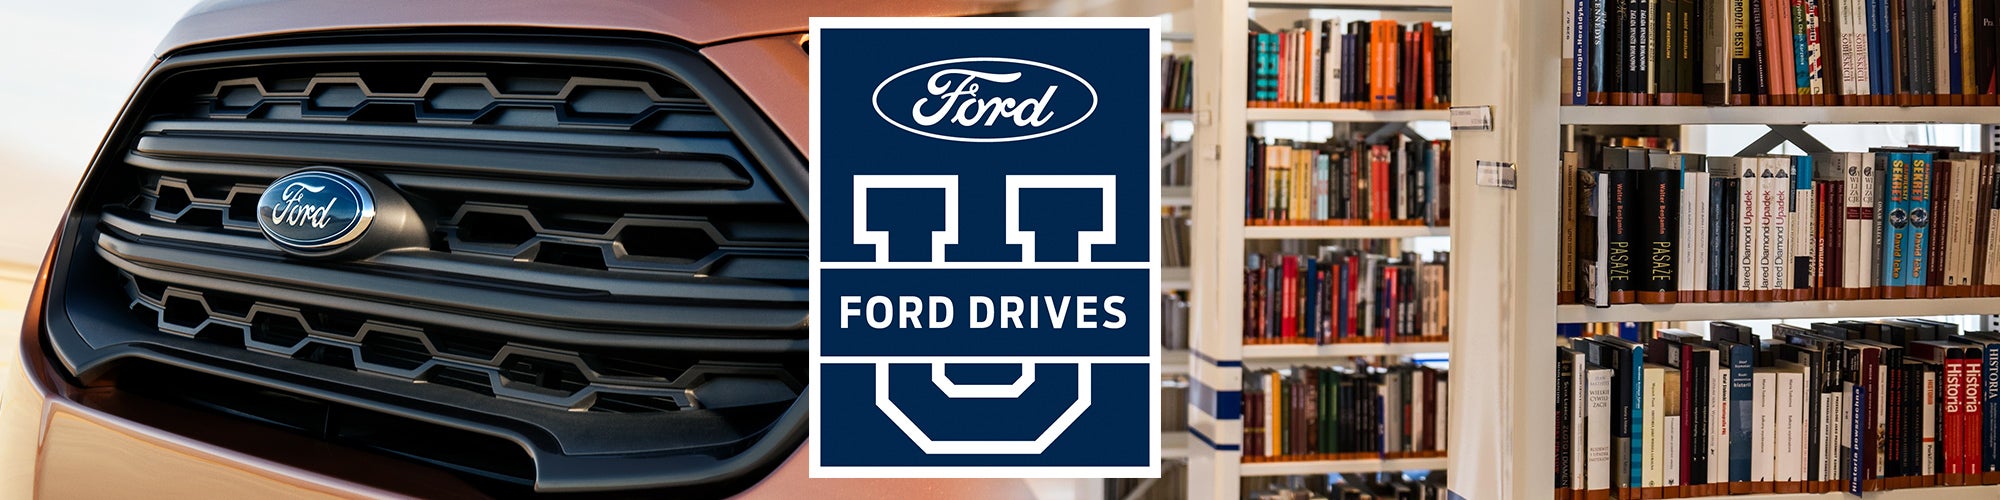 Ford college discount